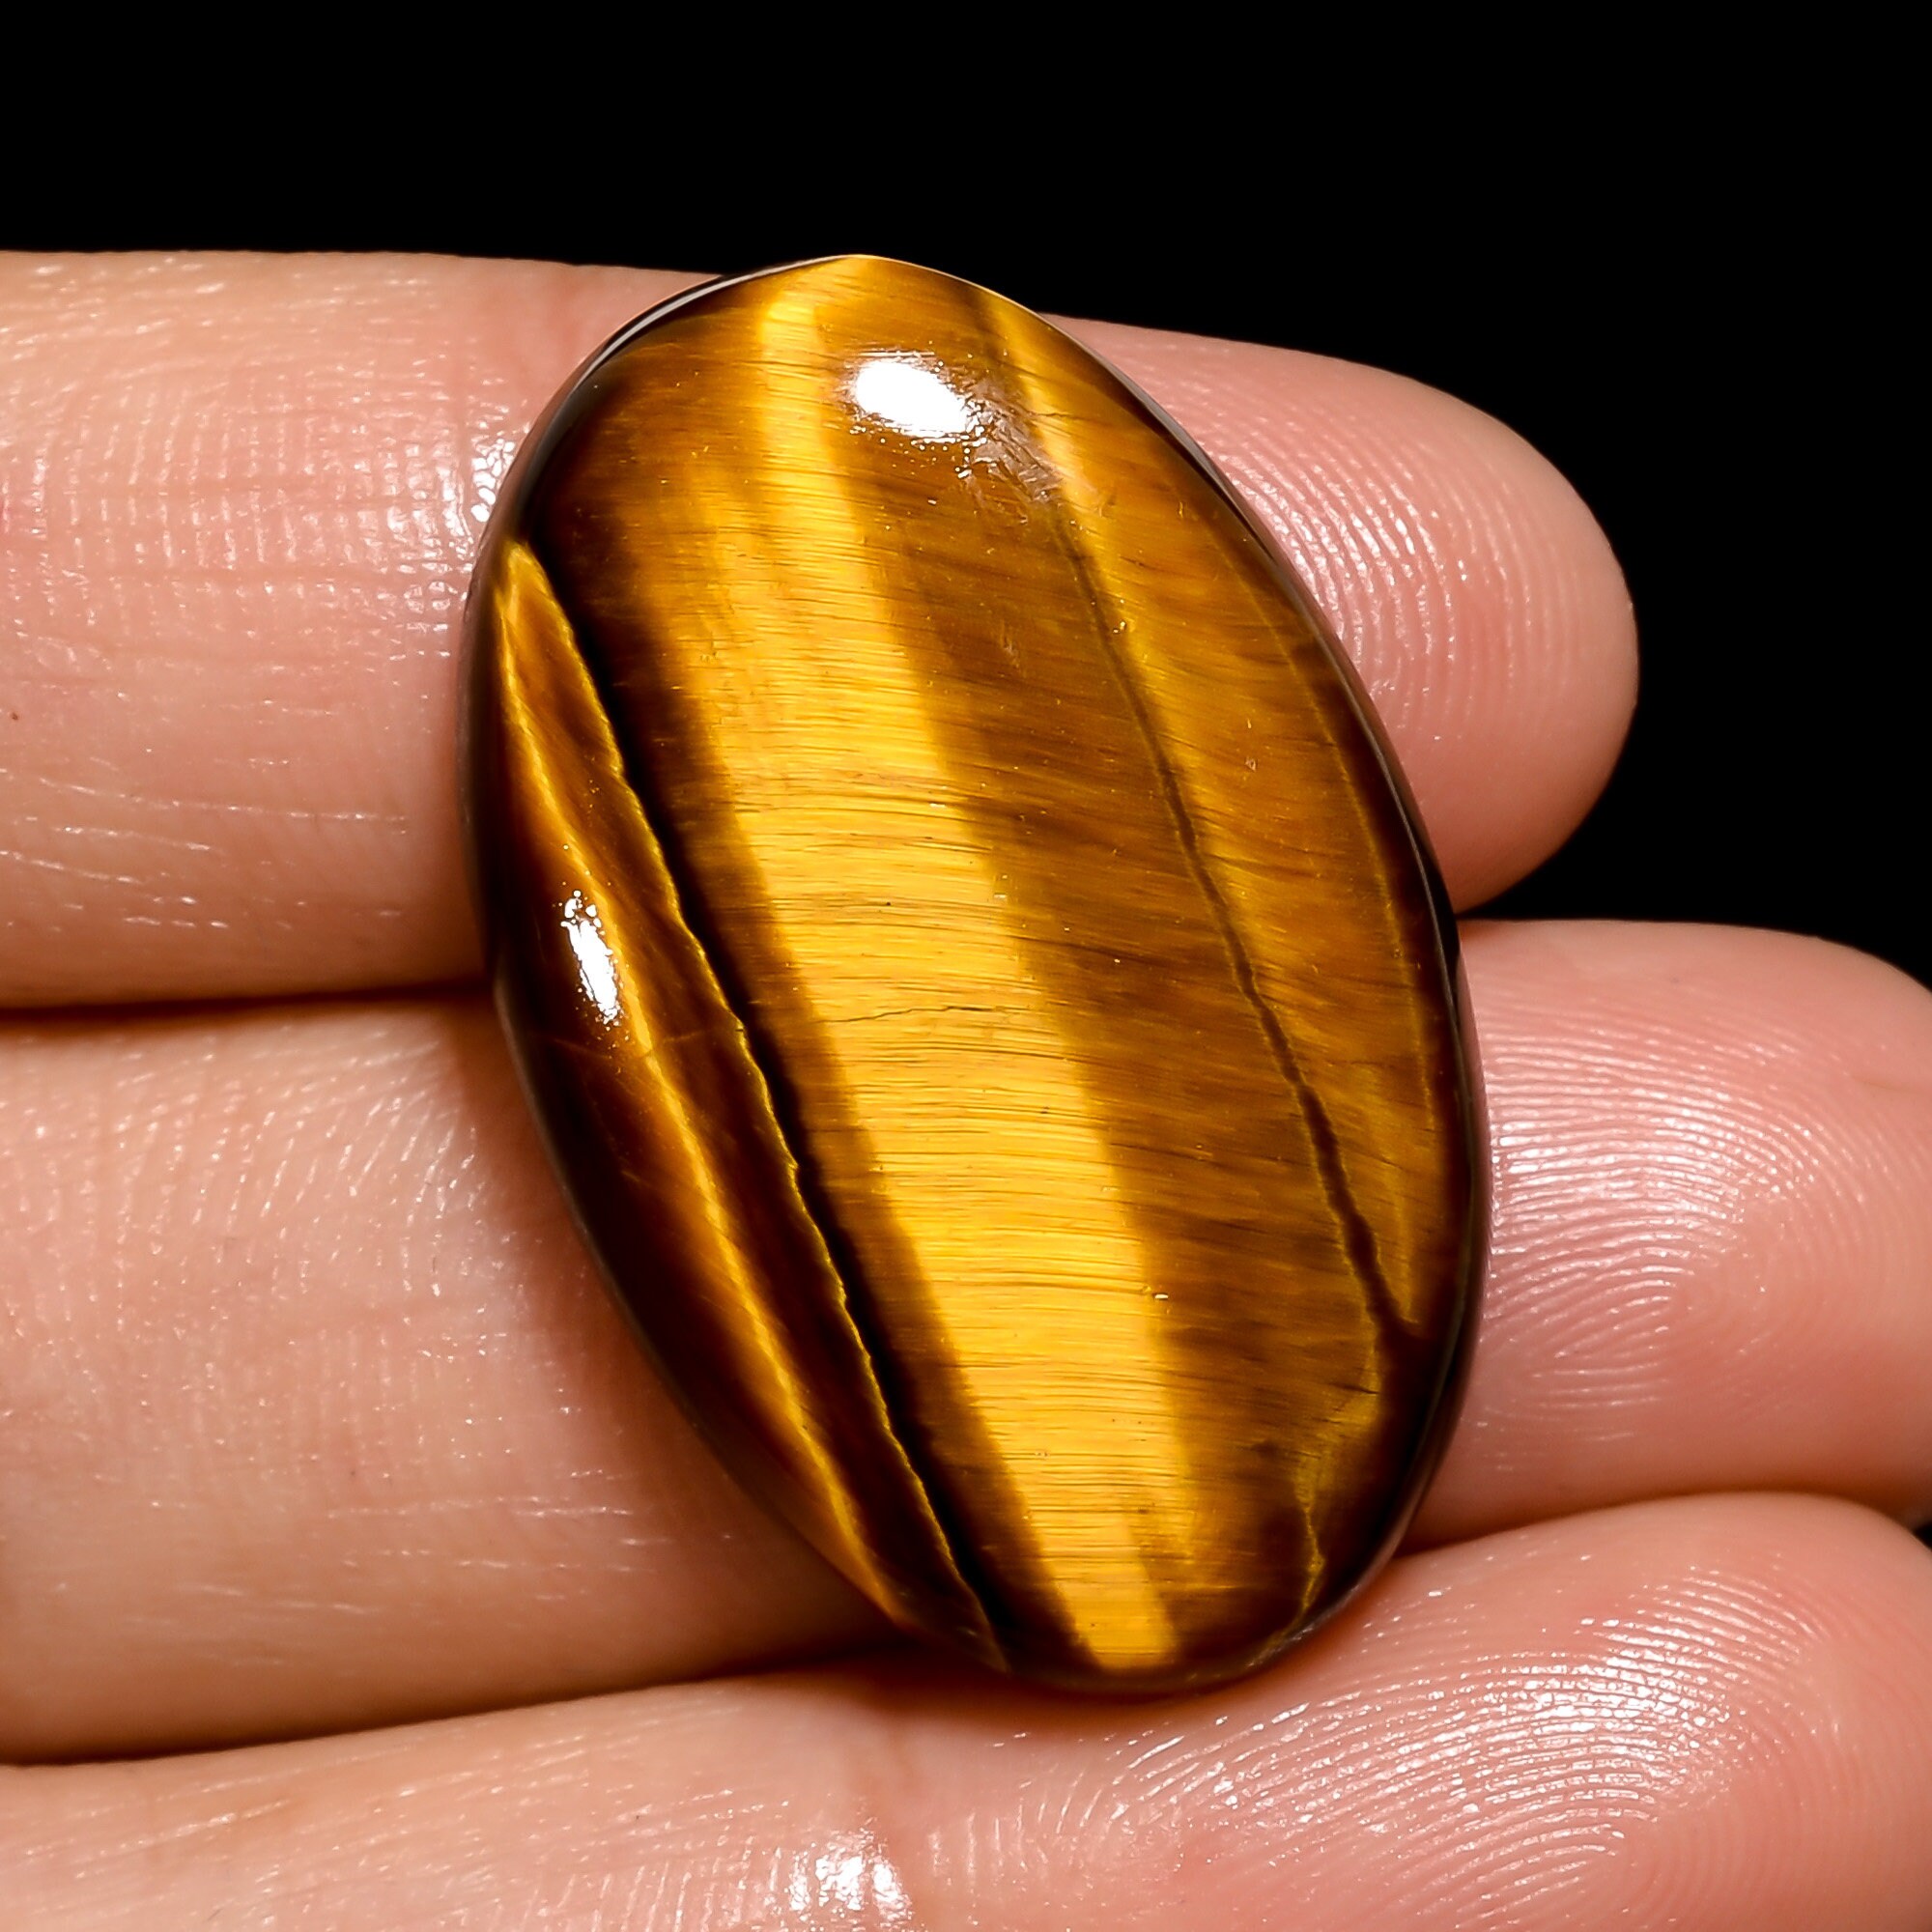 127.5 Ct Wonderful Top Grade Quality 100% Natural Tiger Eye Oval Shape Cabochon Loose Gemstone For Making Jewelry 37X27X14 mm A-700